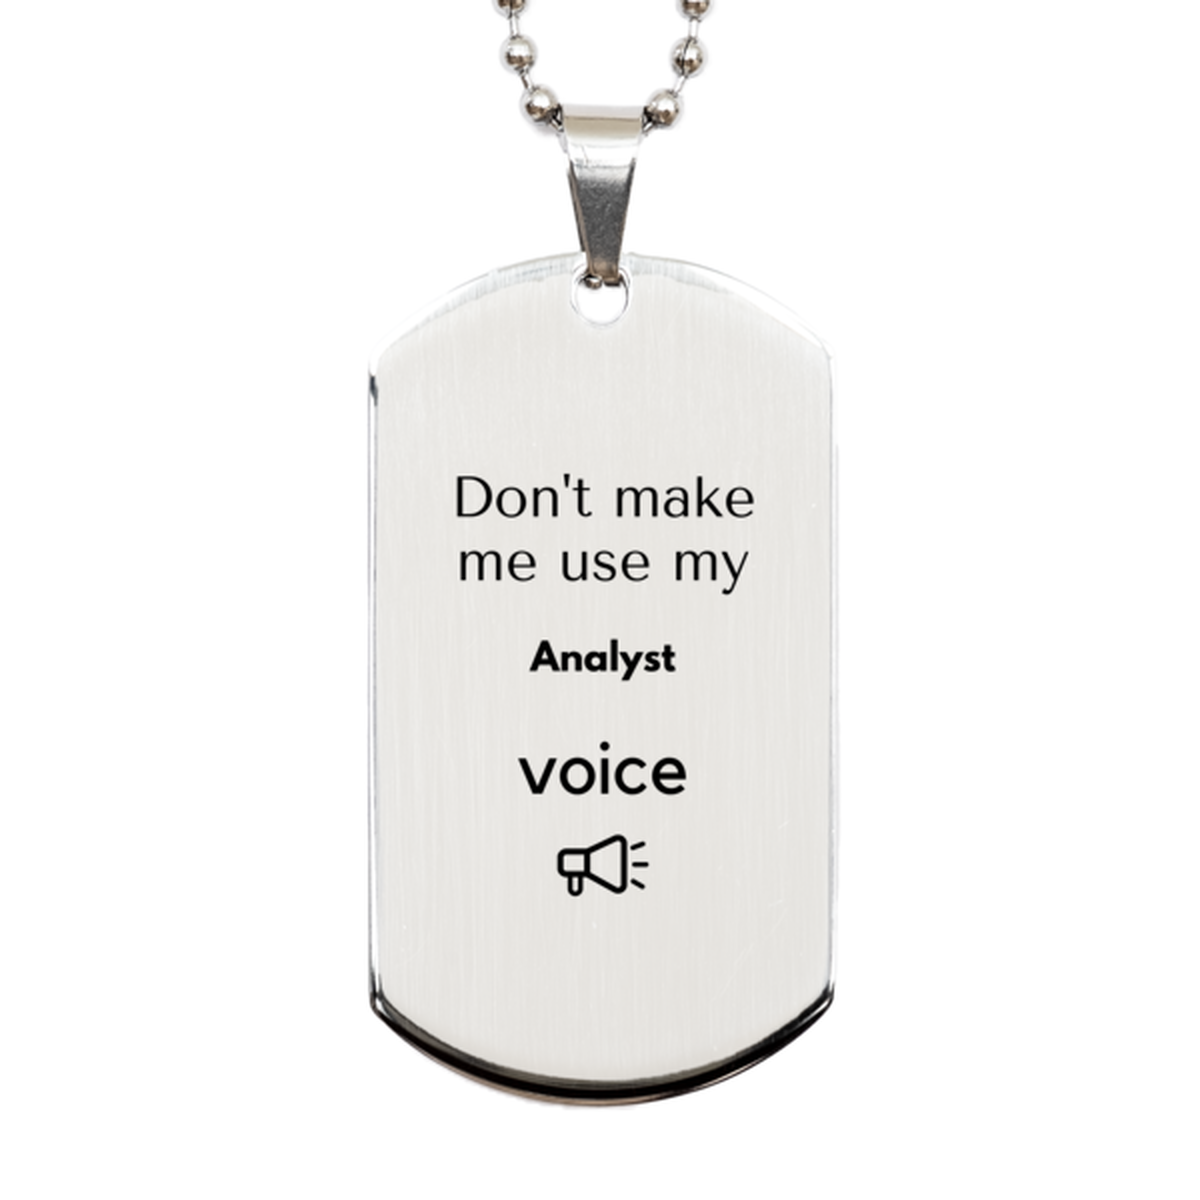 Don't make me use my Analyst voice, Sarcasm Analyst Gifts, Christmas Analyst Silver Dog Tag Birthday Unique Gifts For Analyst Coworkers, Men, Women, Colleague, Friends